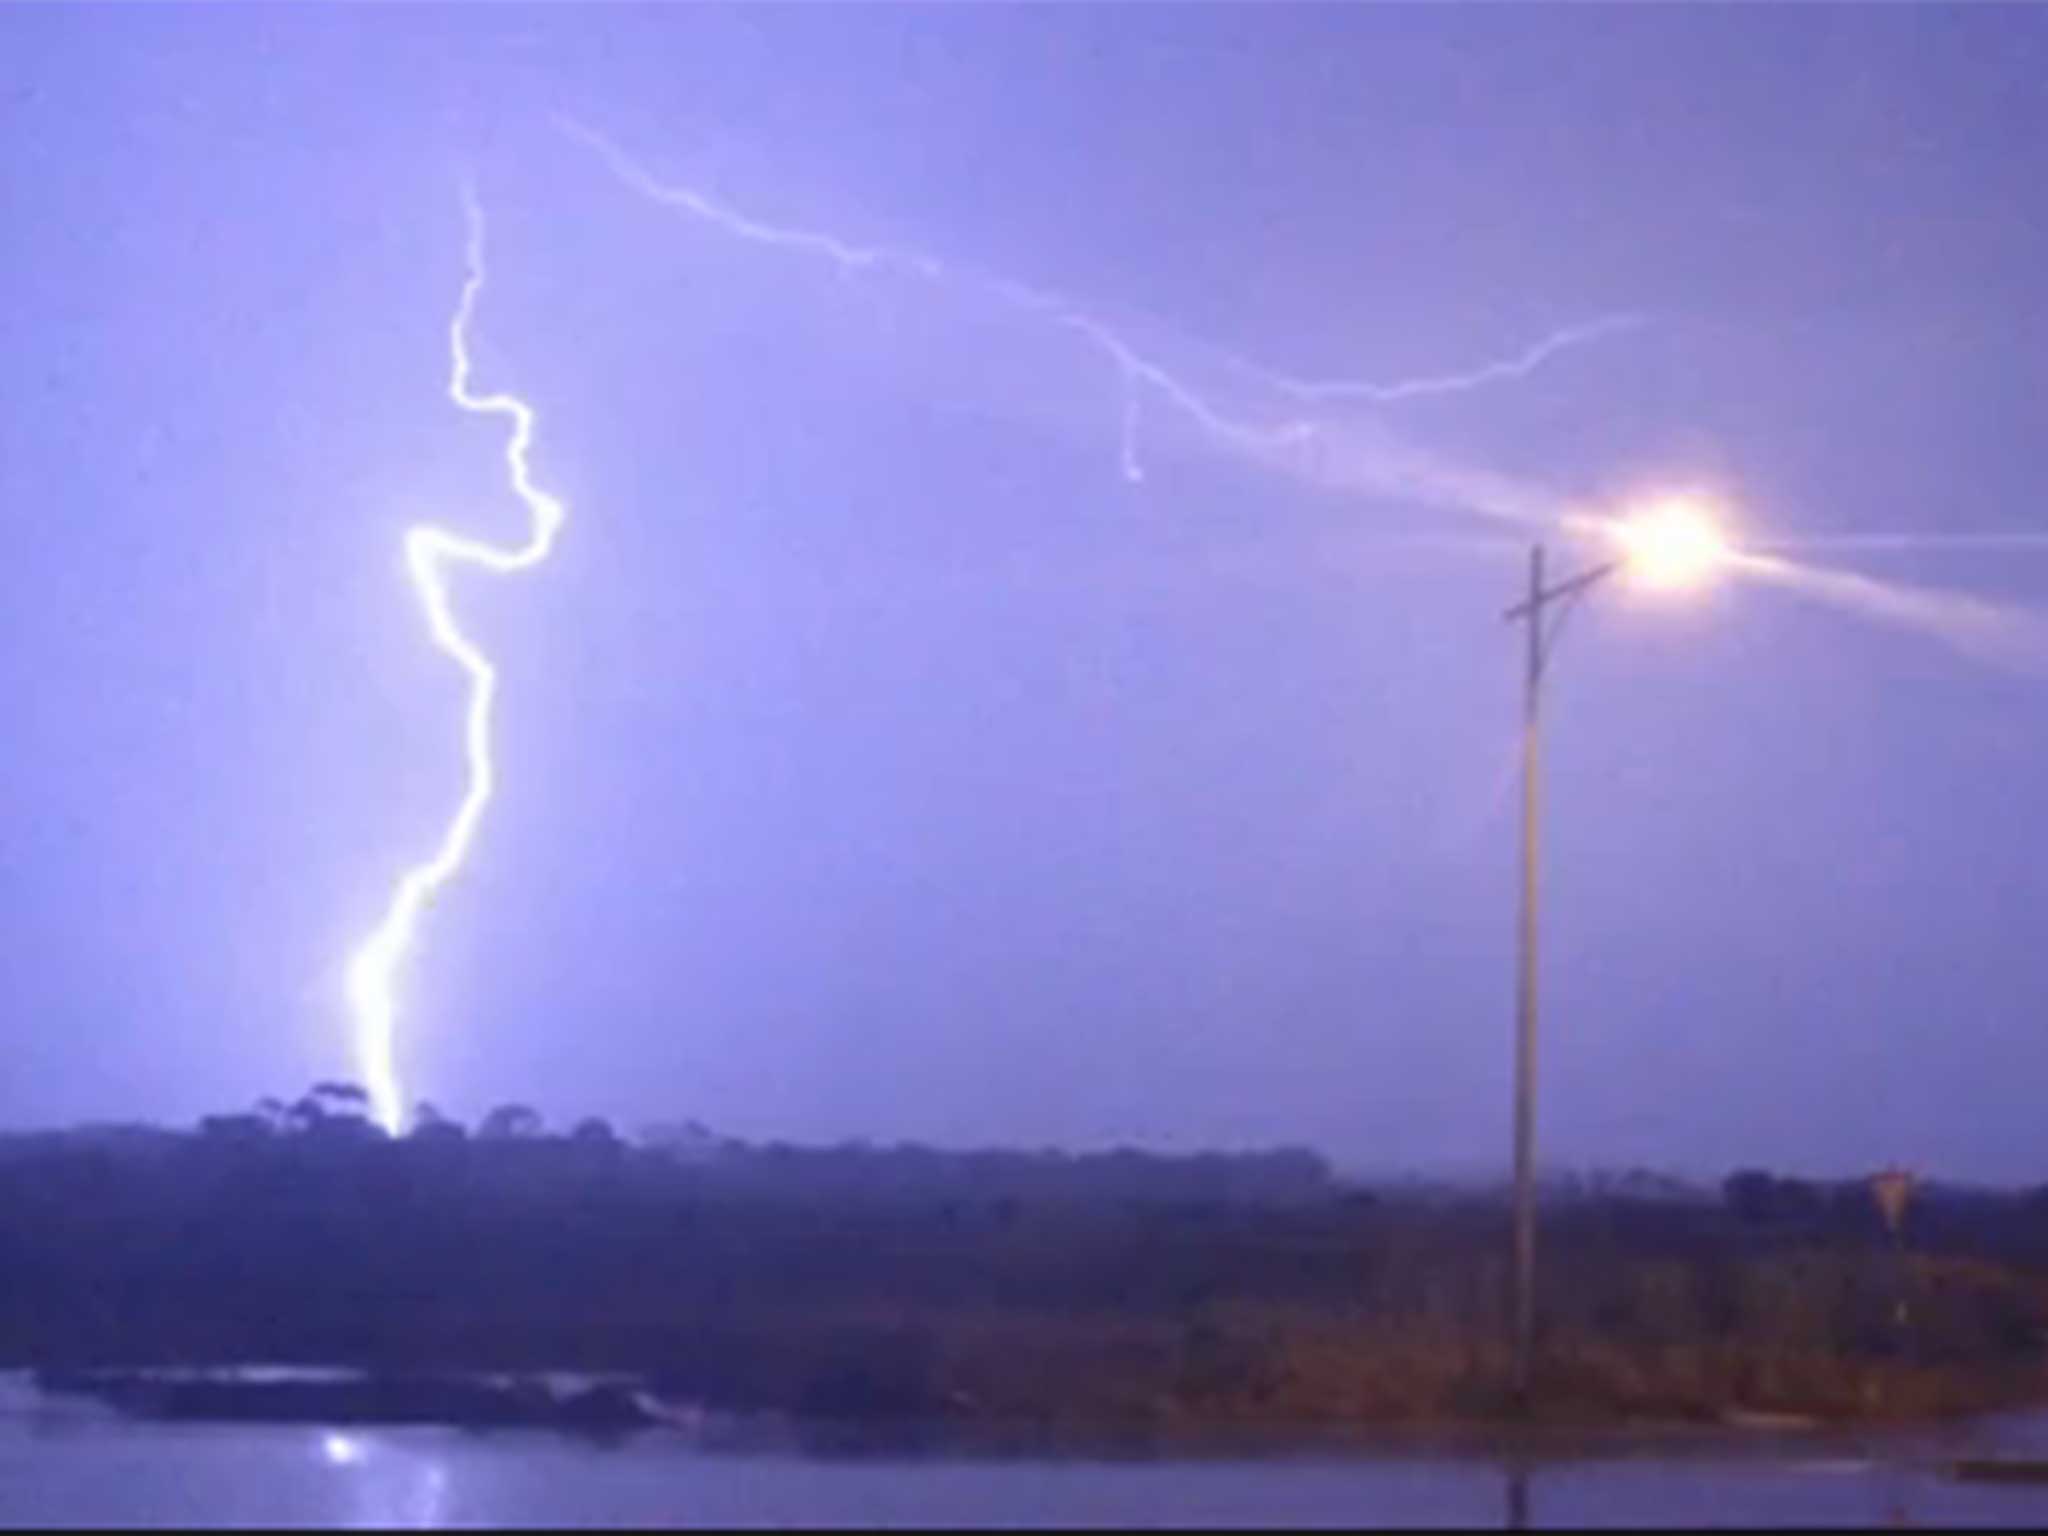 A screen shot from the footage capturing the storm over Melbourne